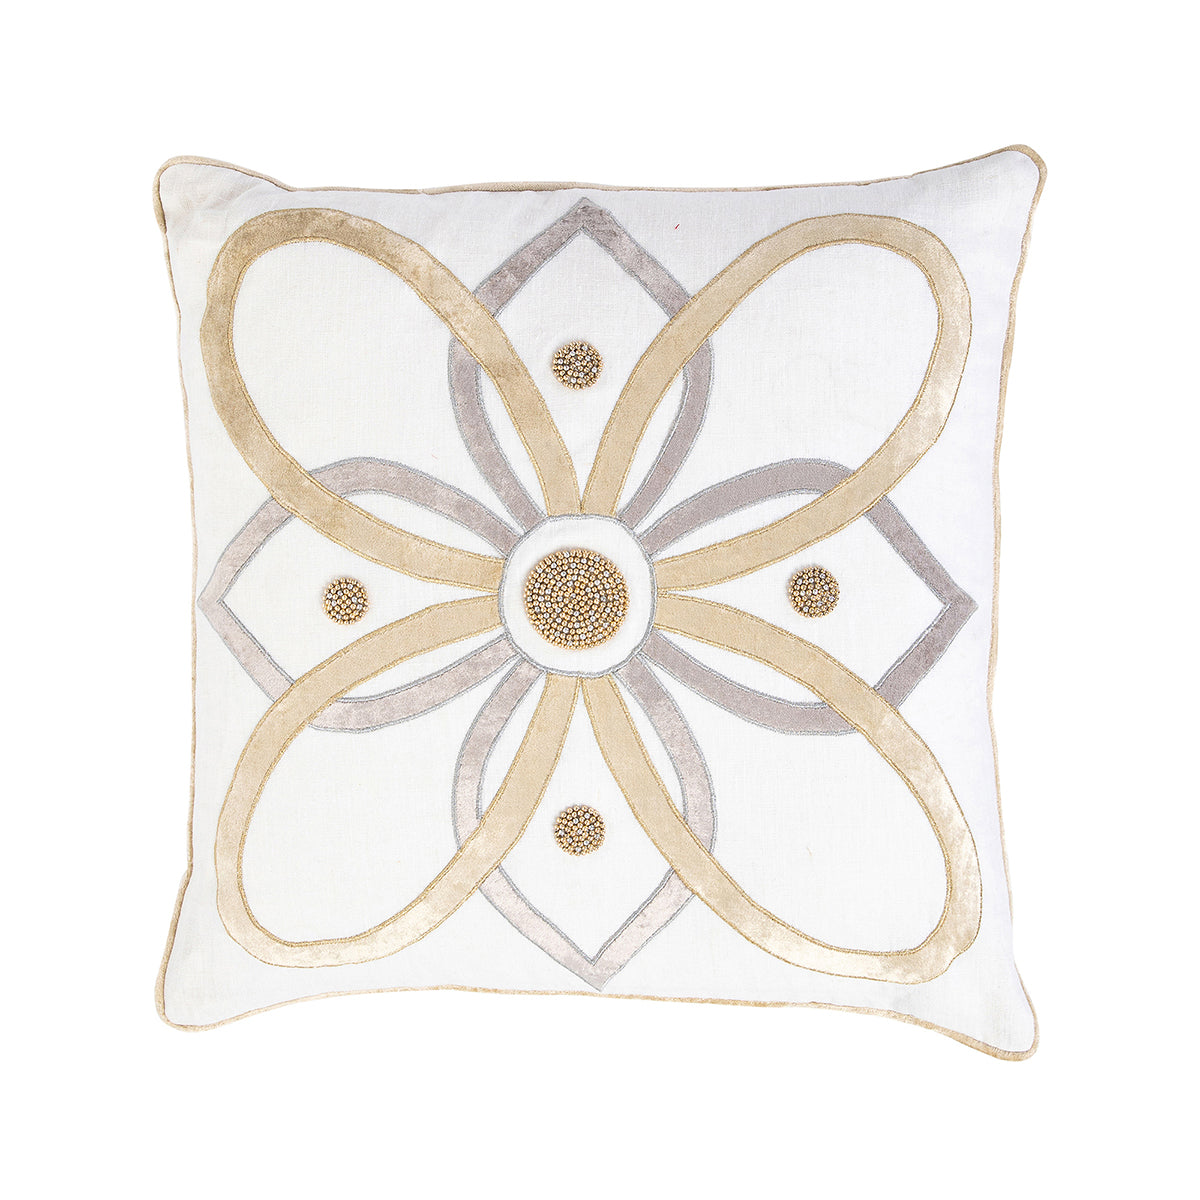 Intricately embellished with velvet applique and shimmering beads, this plush linen pillow will instantly transform your living room or guest room into a glimmering, Wintery wonderland. Filled with 10% down and 90% feather fill.